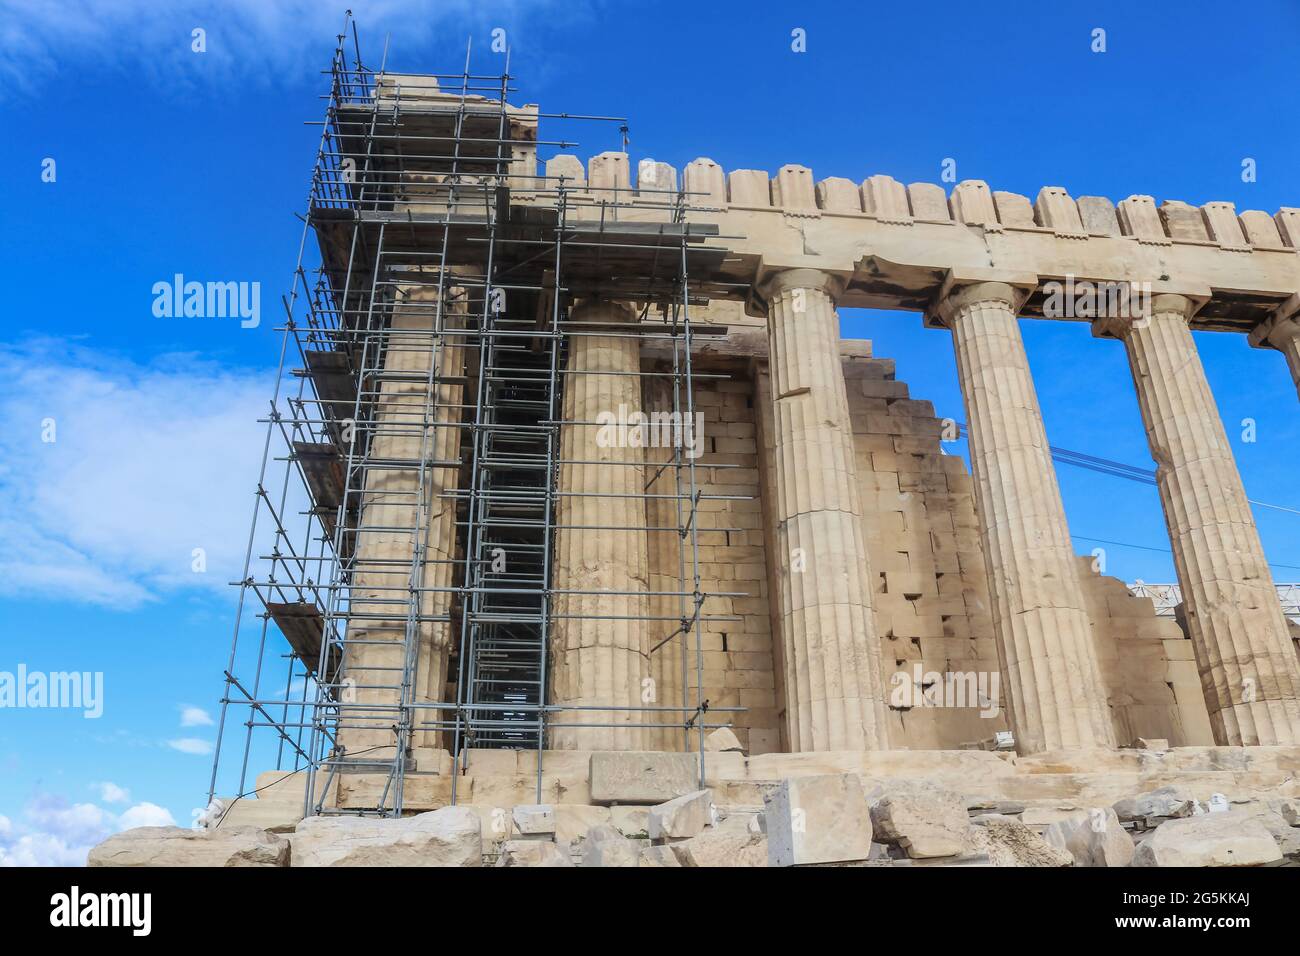 The Parthenon in Athens Greece under construction with metal scaffolding - view looking up from close-up to building - beautiful blue sky Stock Photo